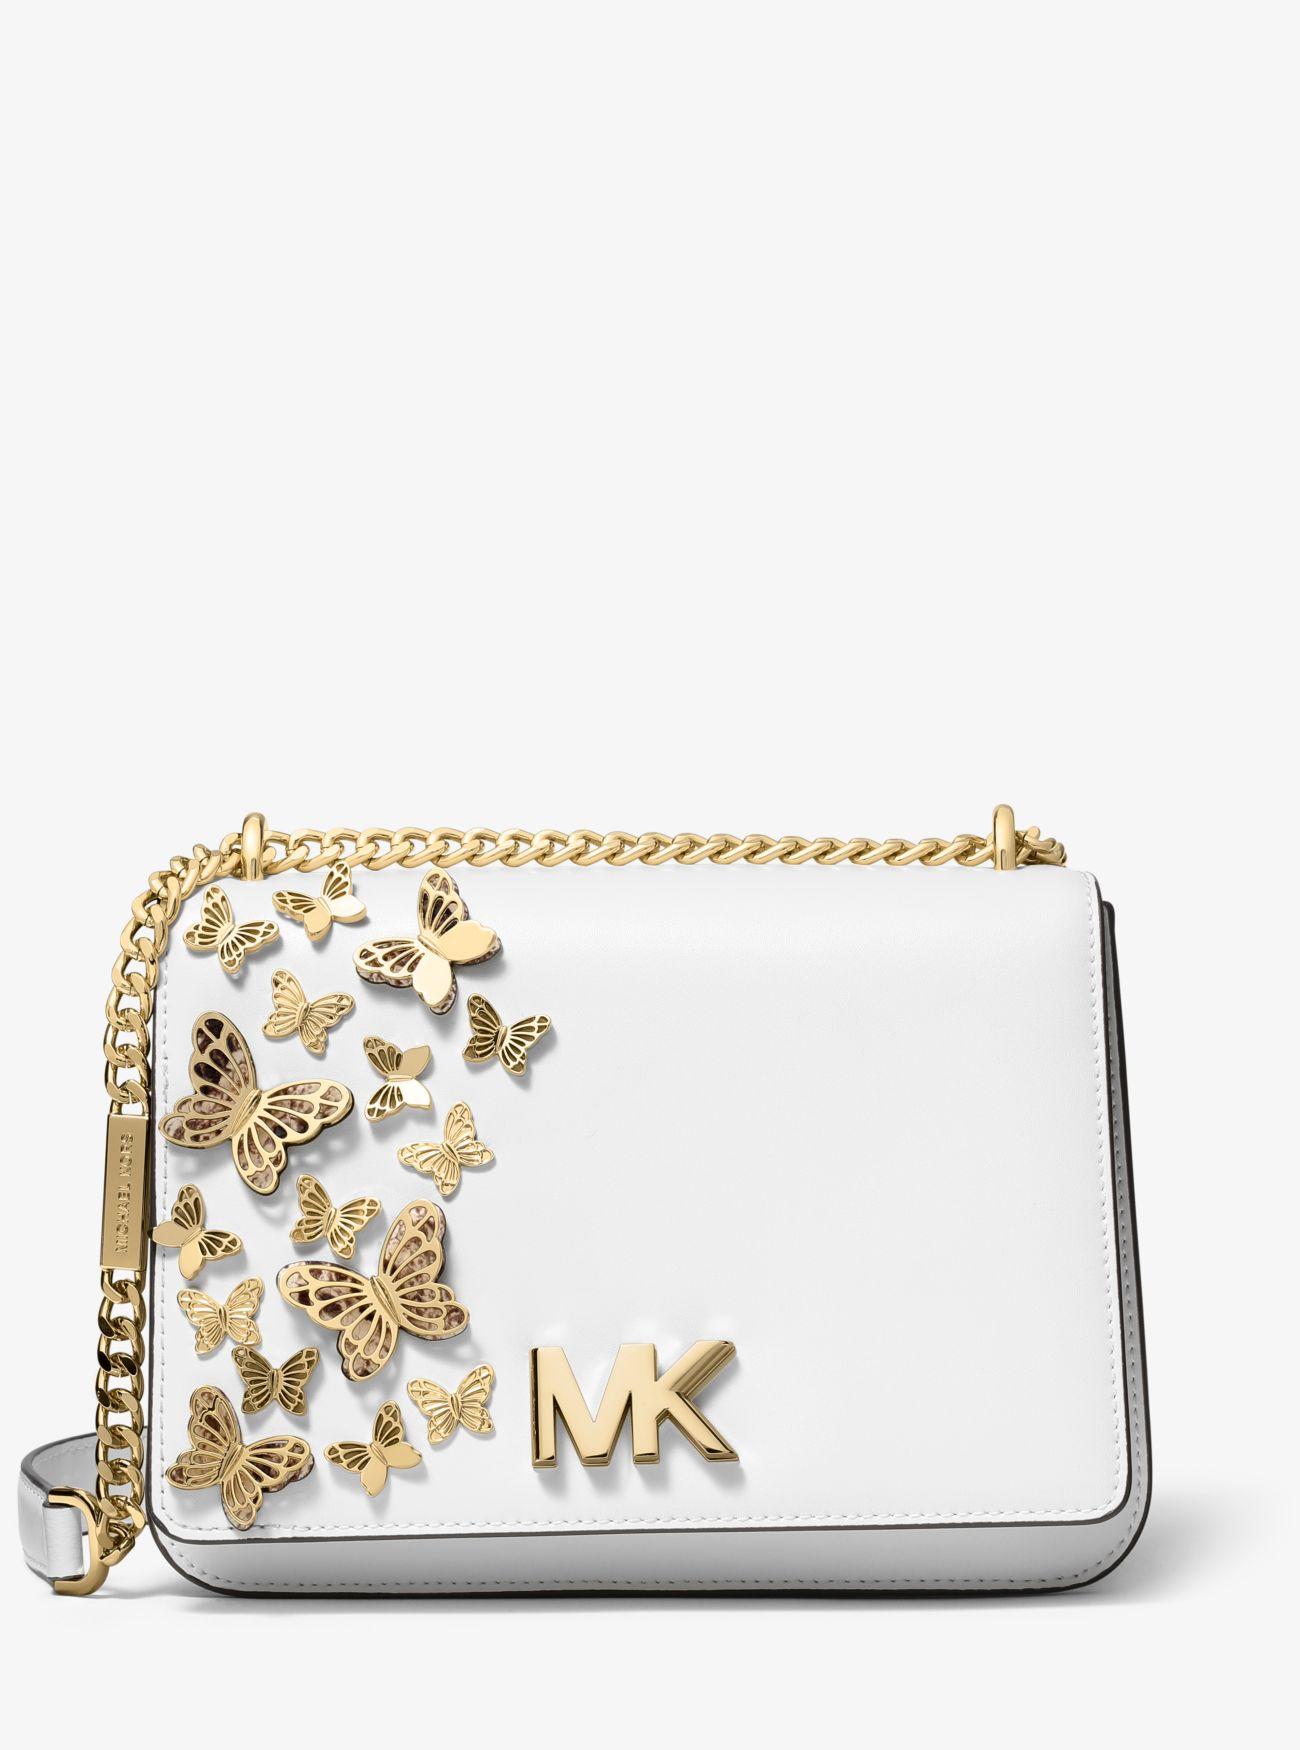 Michael Kors Butterfly Chain Leather Shoulder Bag in White | Lyst